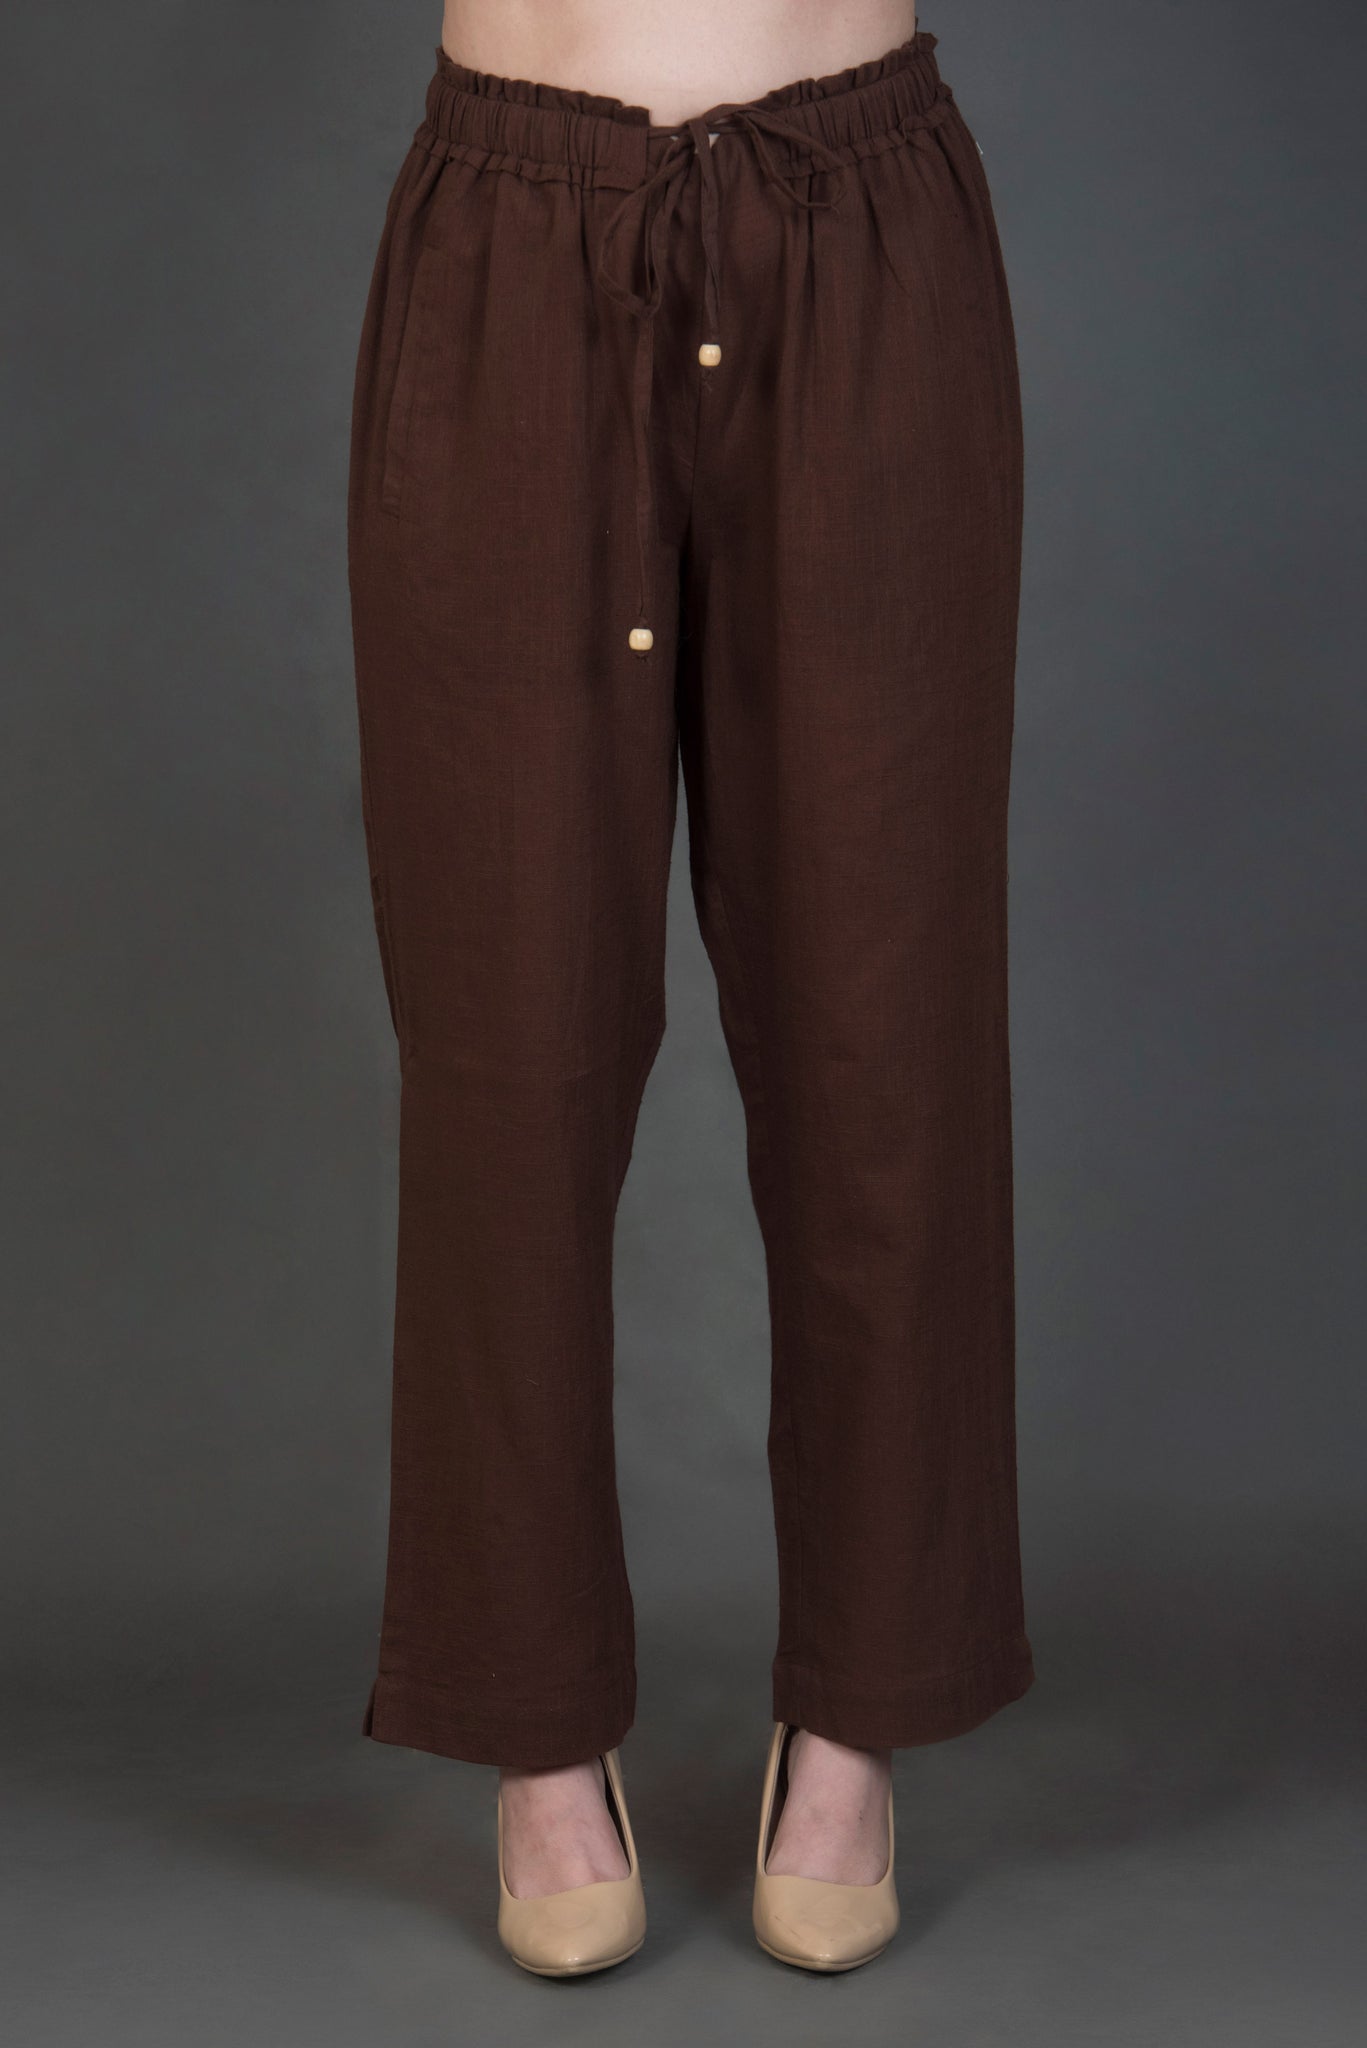 Brown Solid Pants with pocket